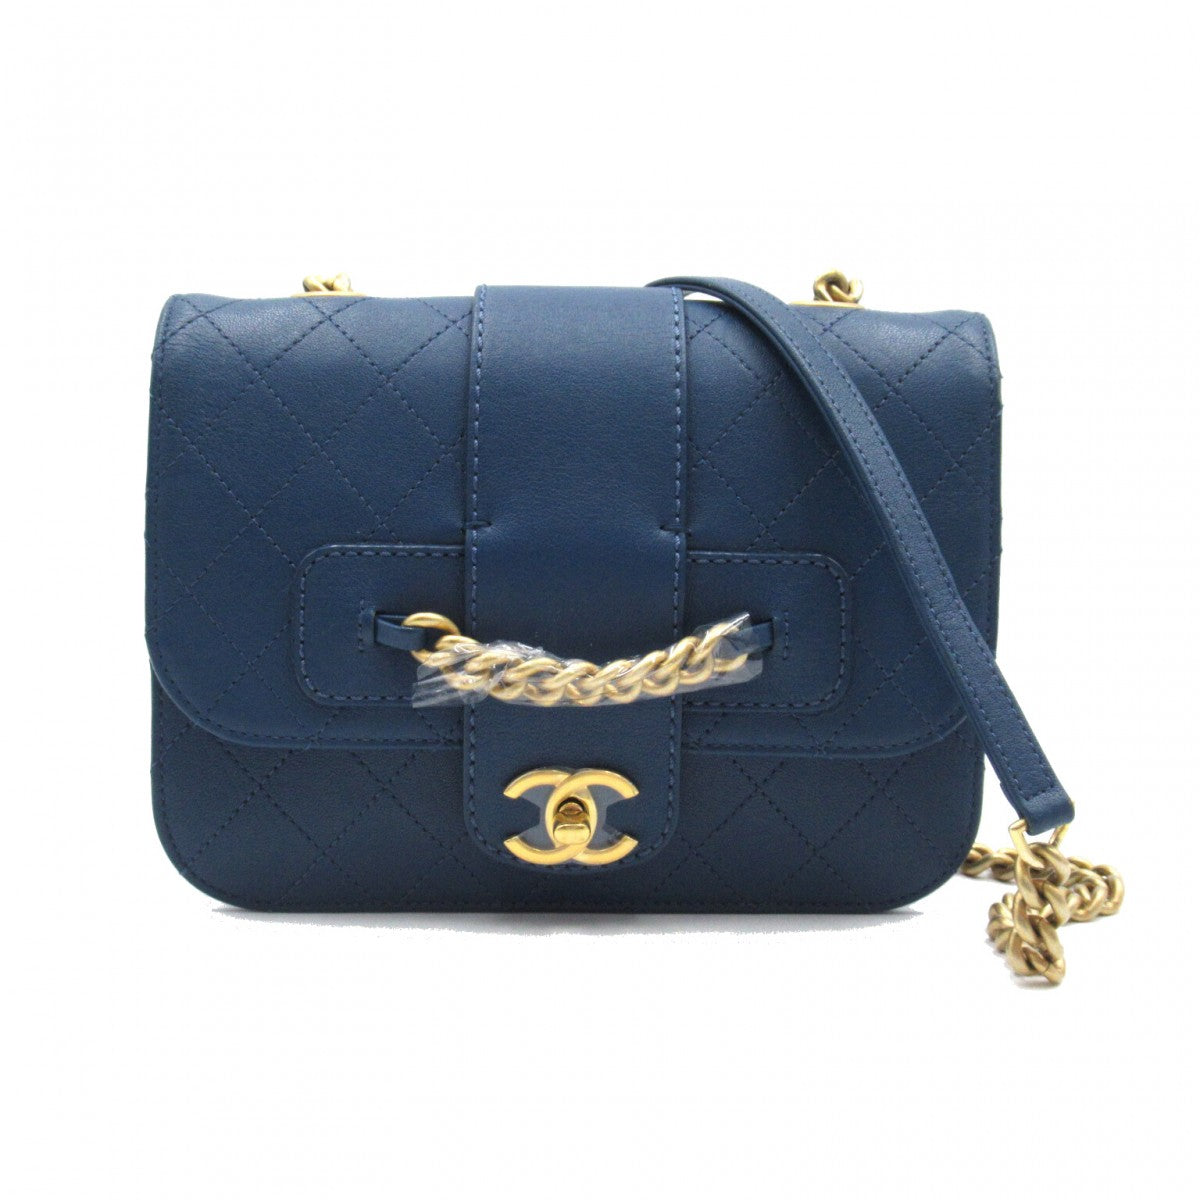 CC Quilted Leather Front Chain Flap Bag